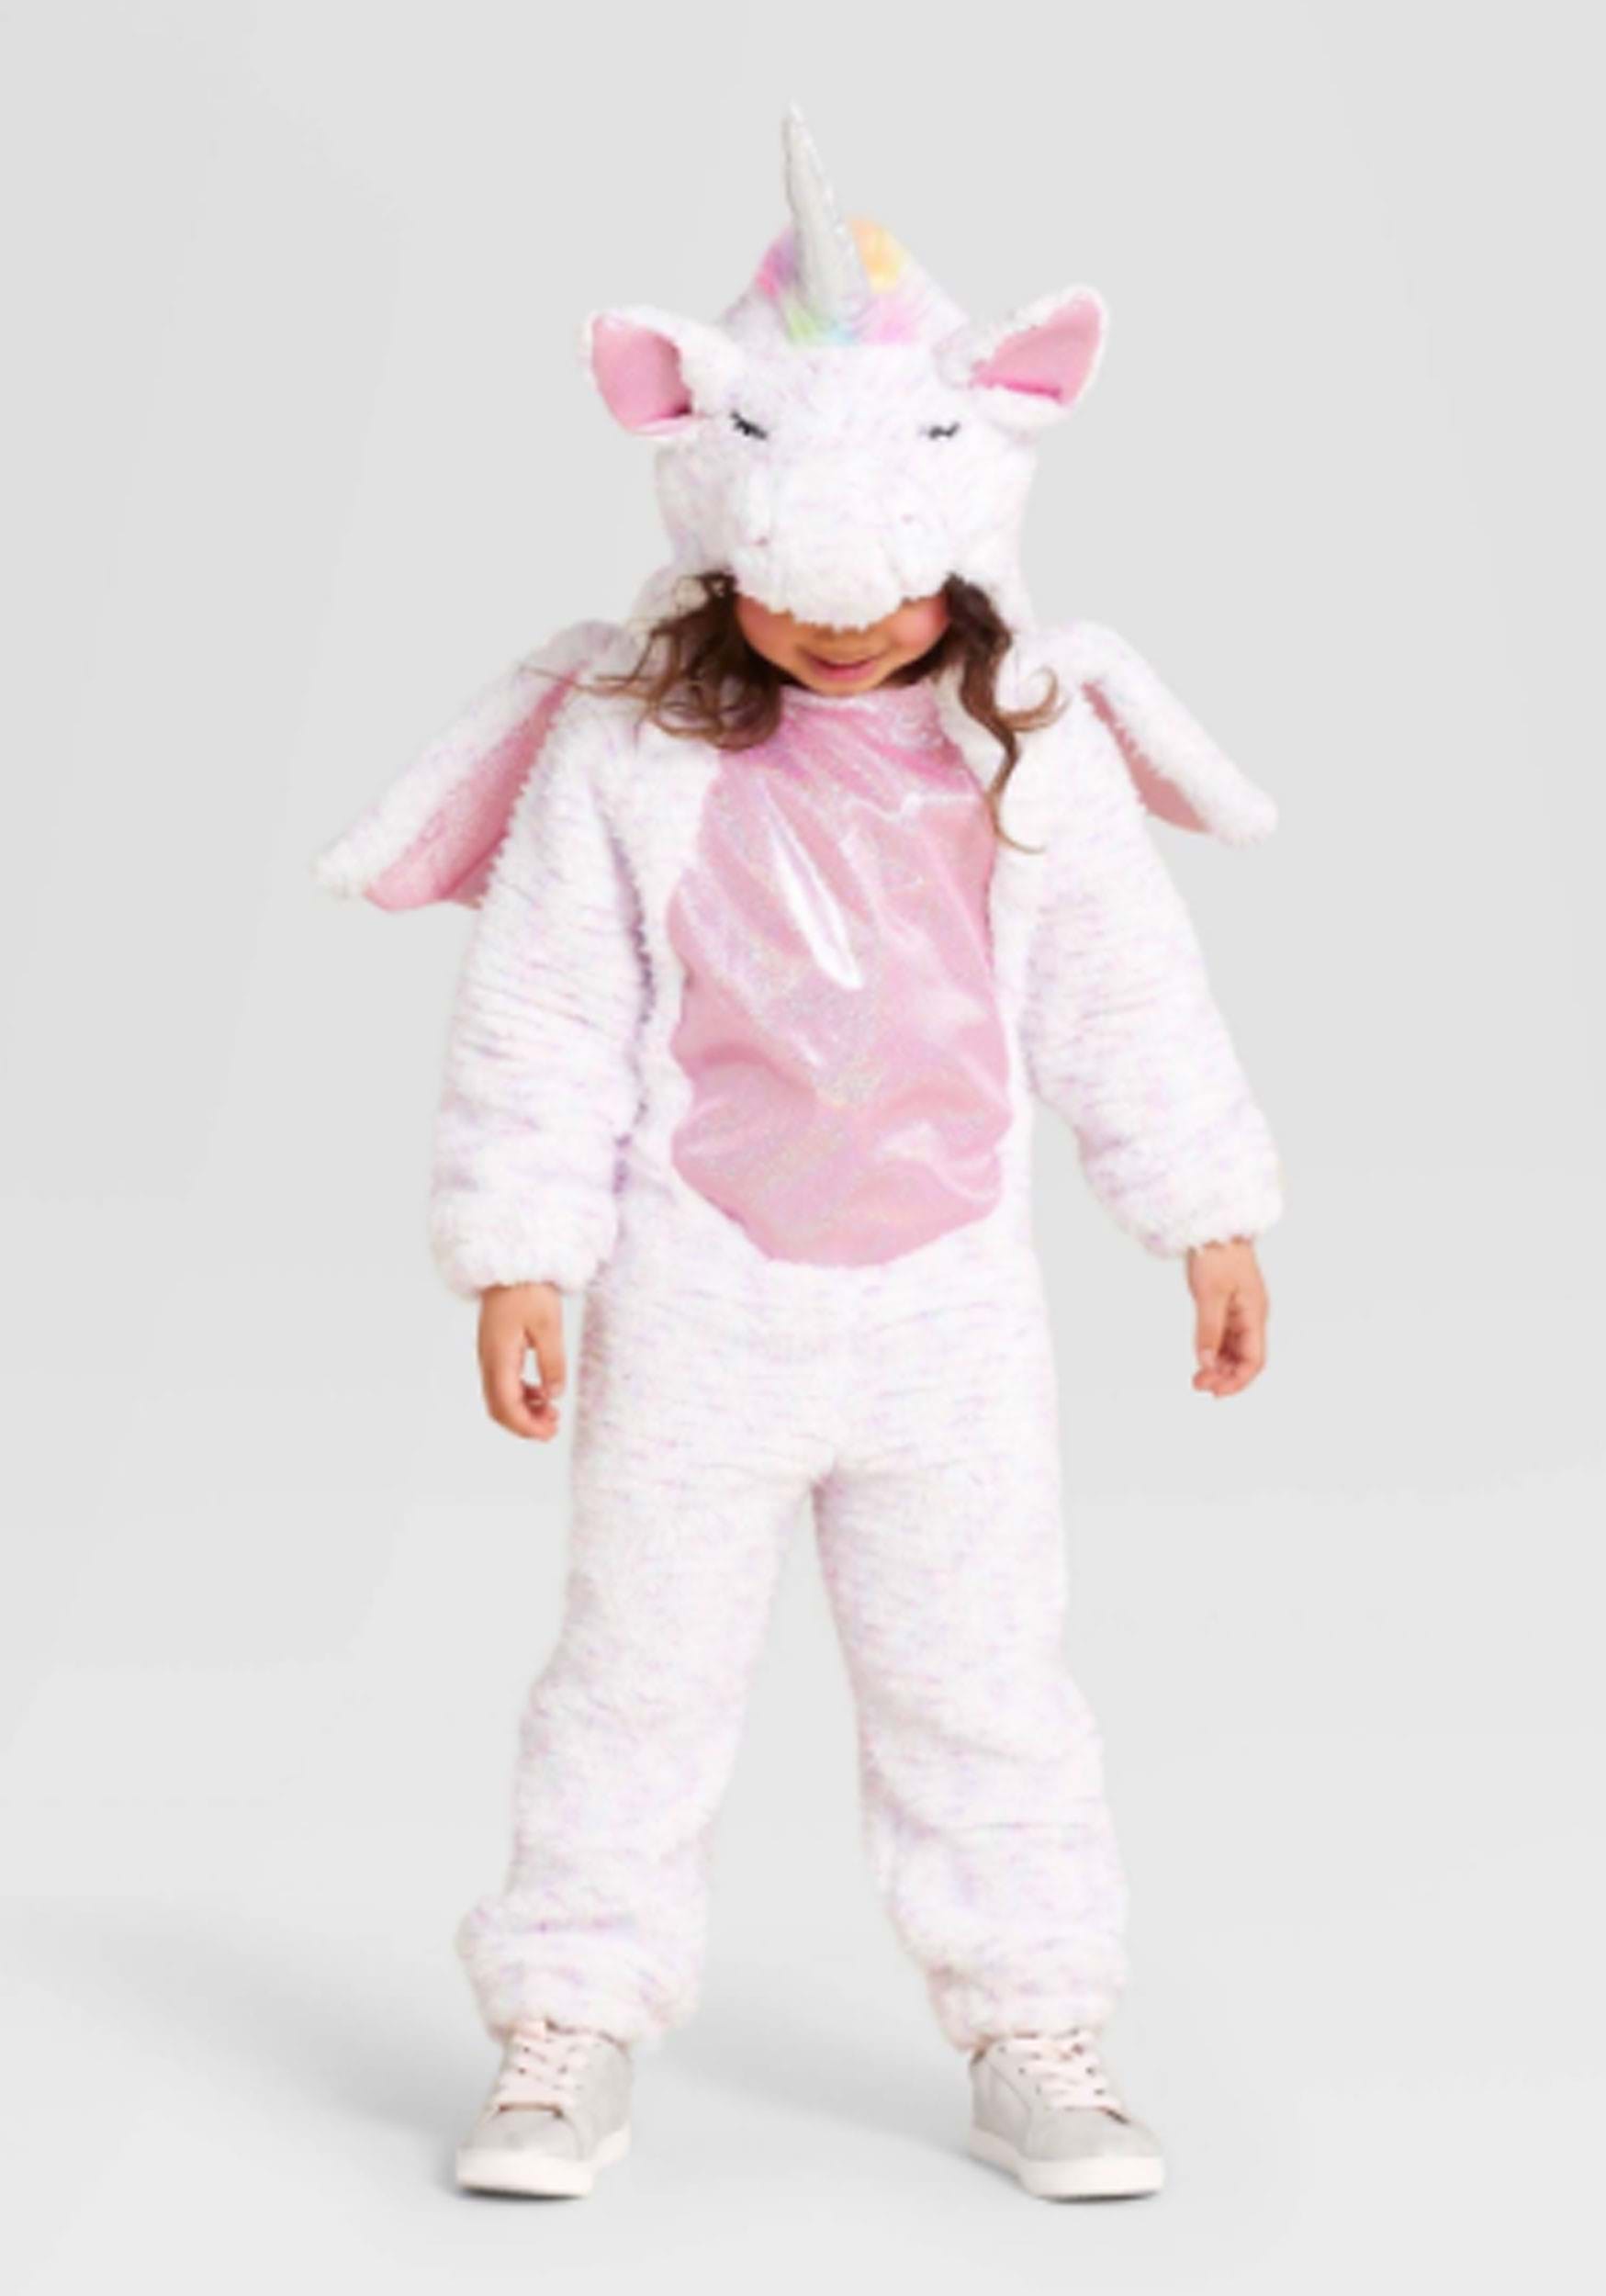 Fairytale Ride-on Unicorn Costume for Toddlers